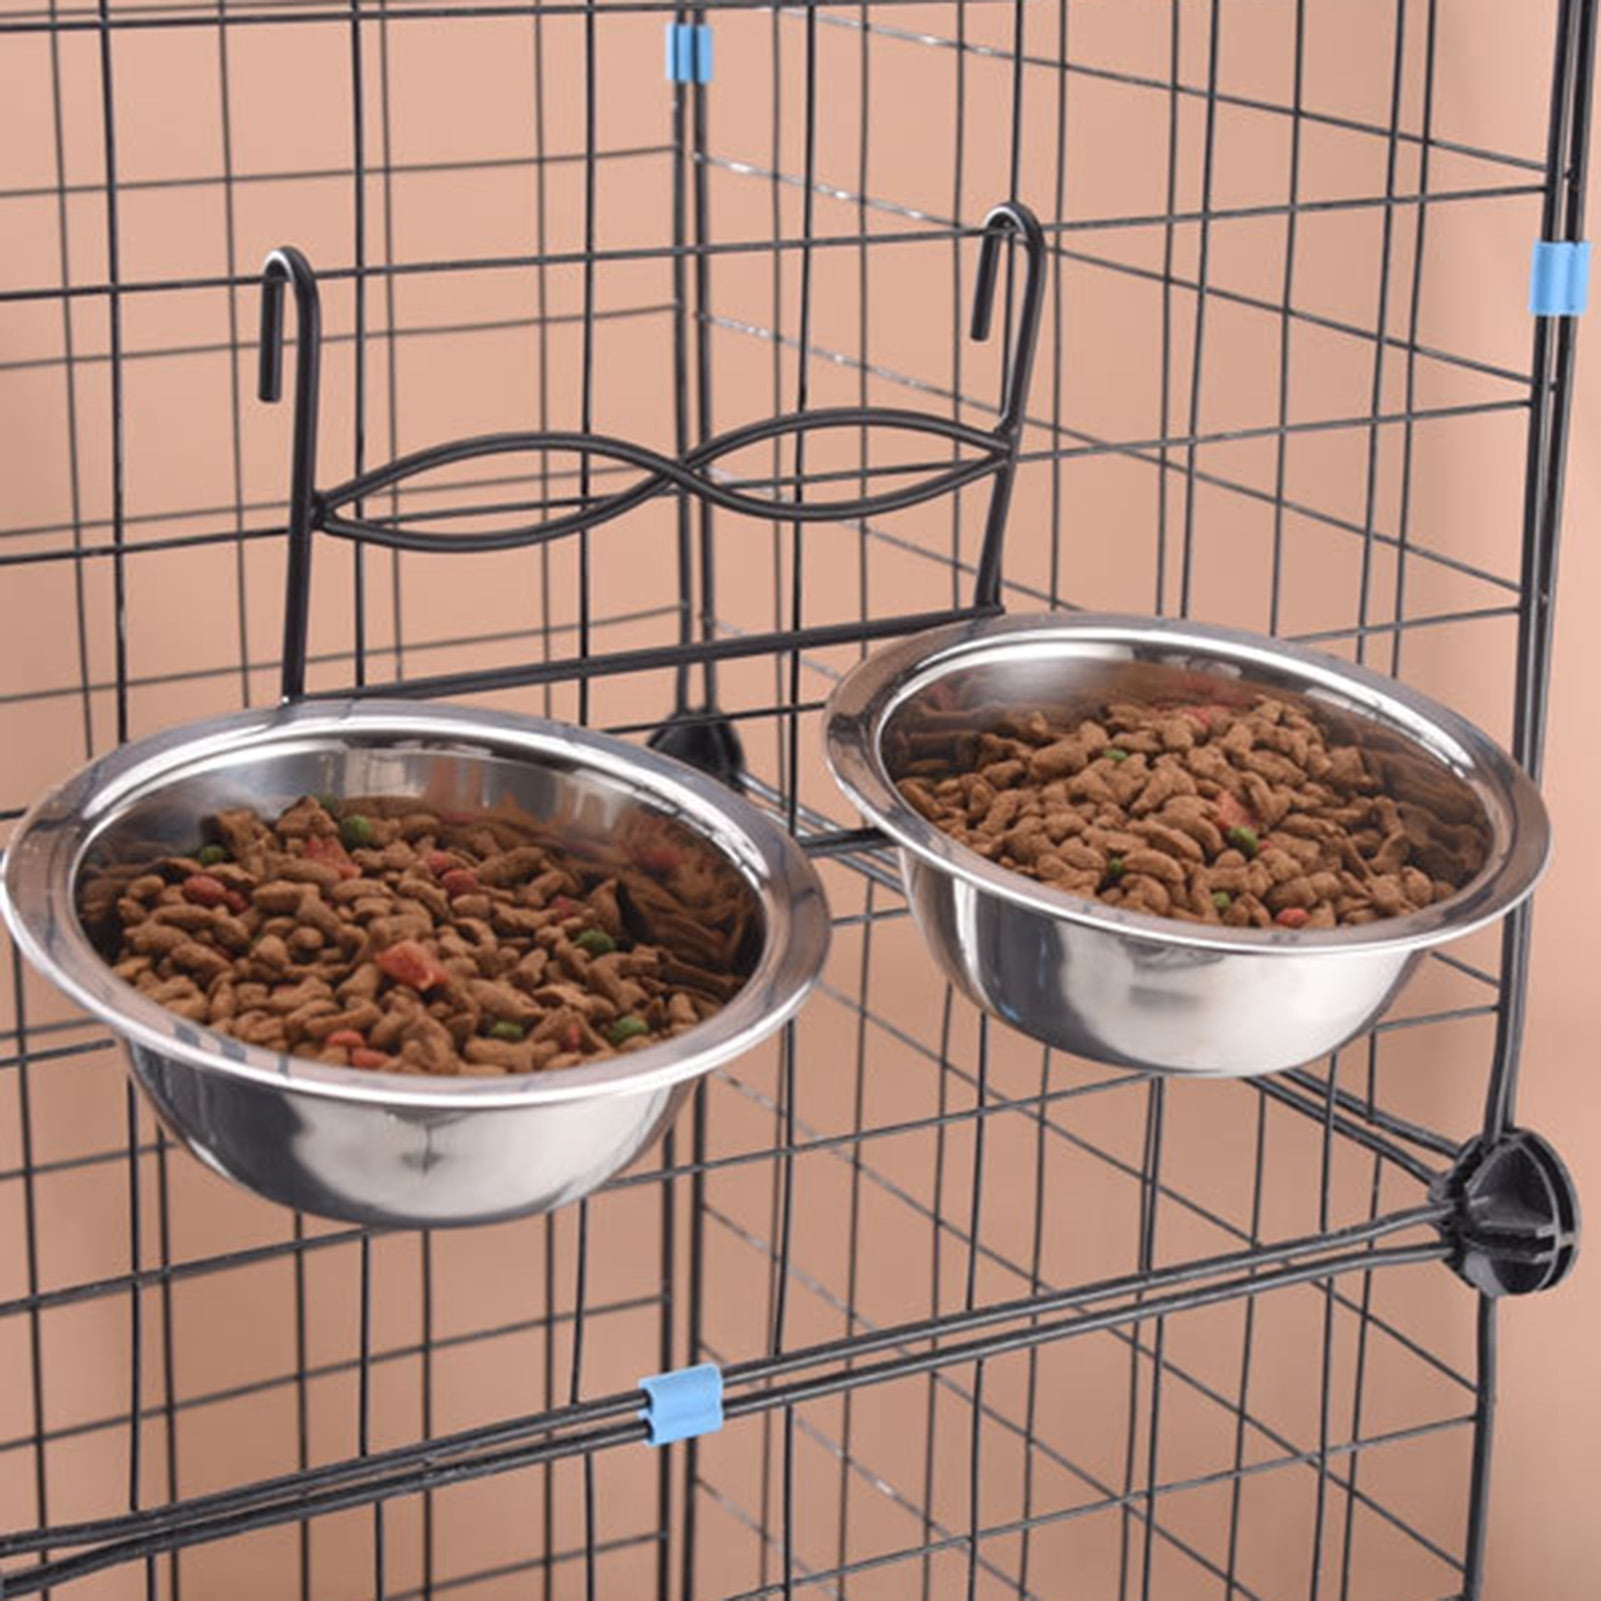 Pet Supplies Stainless Steel Coop Cup food or Water Bowl For Dog Bird Cage Crate 